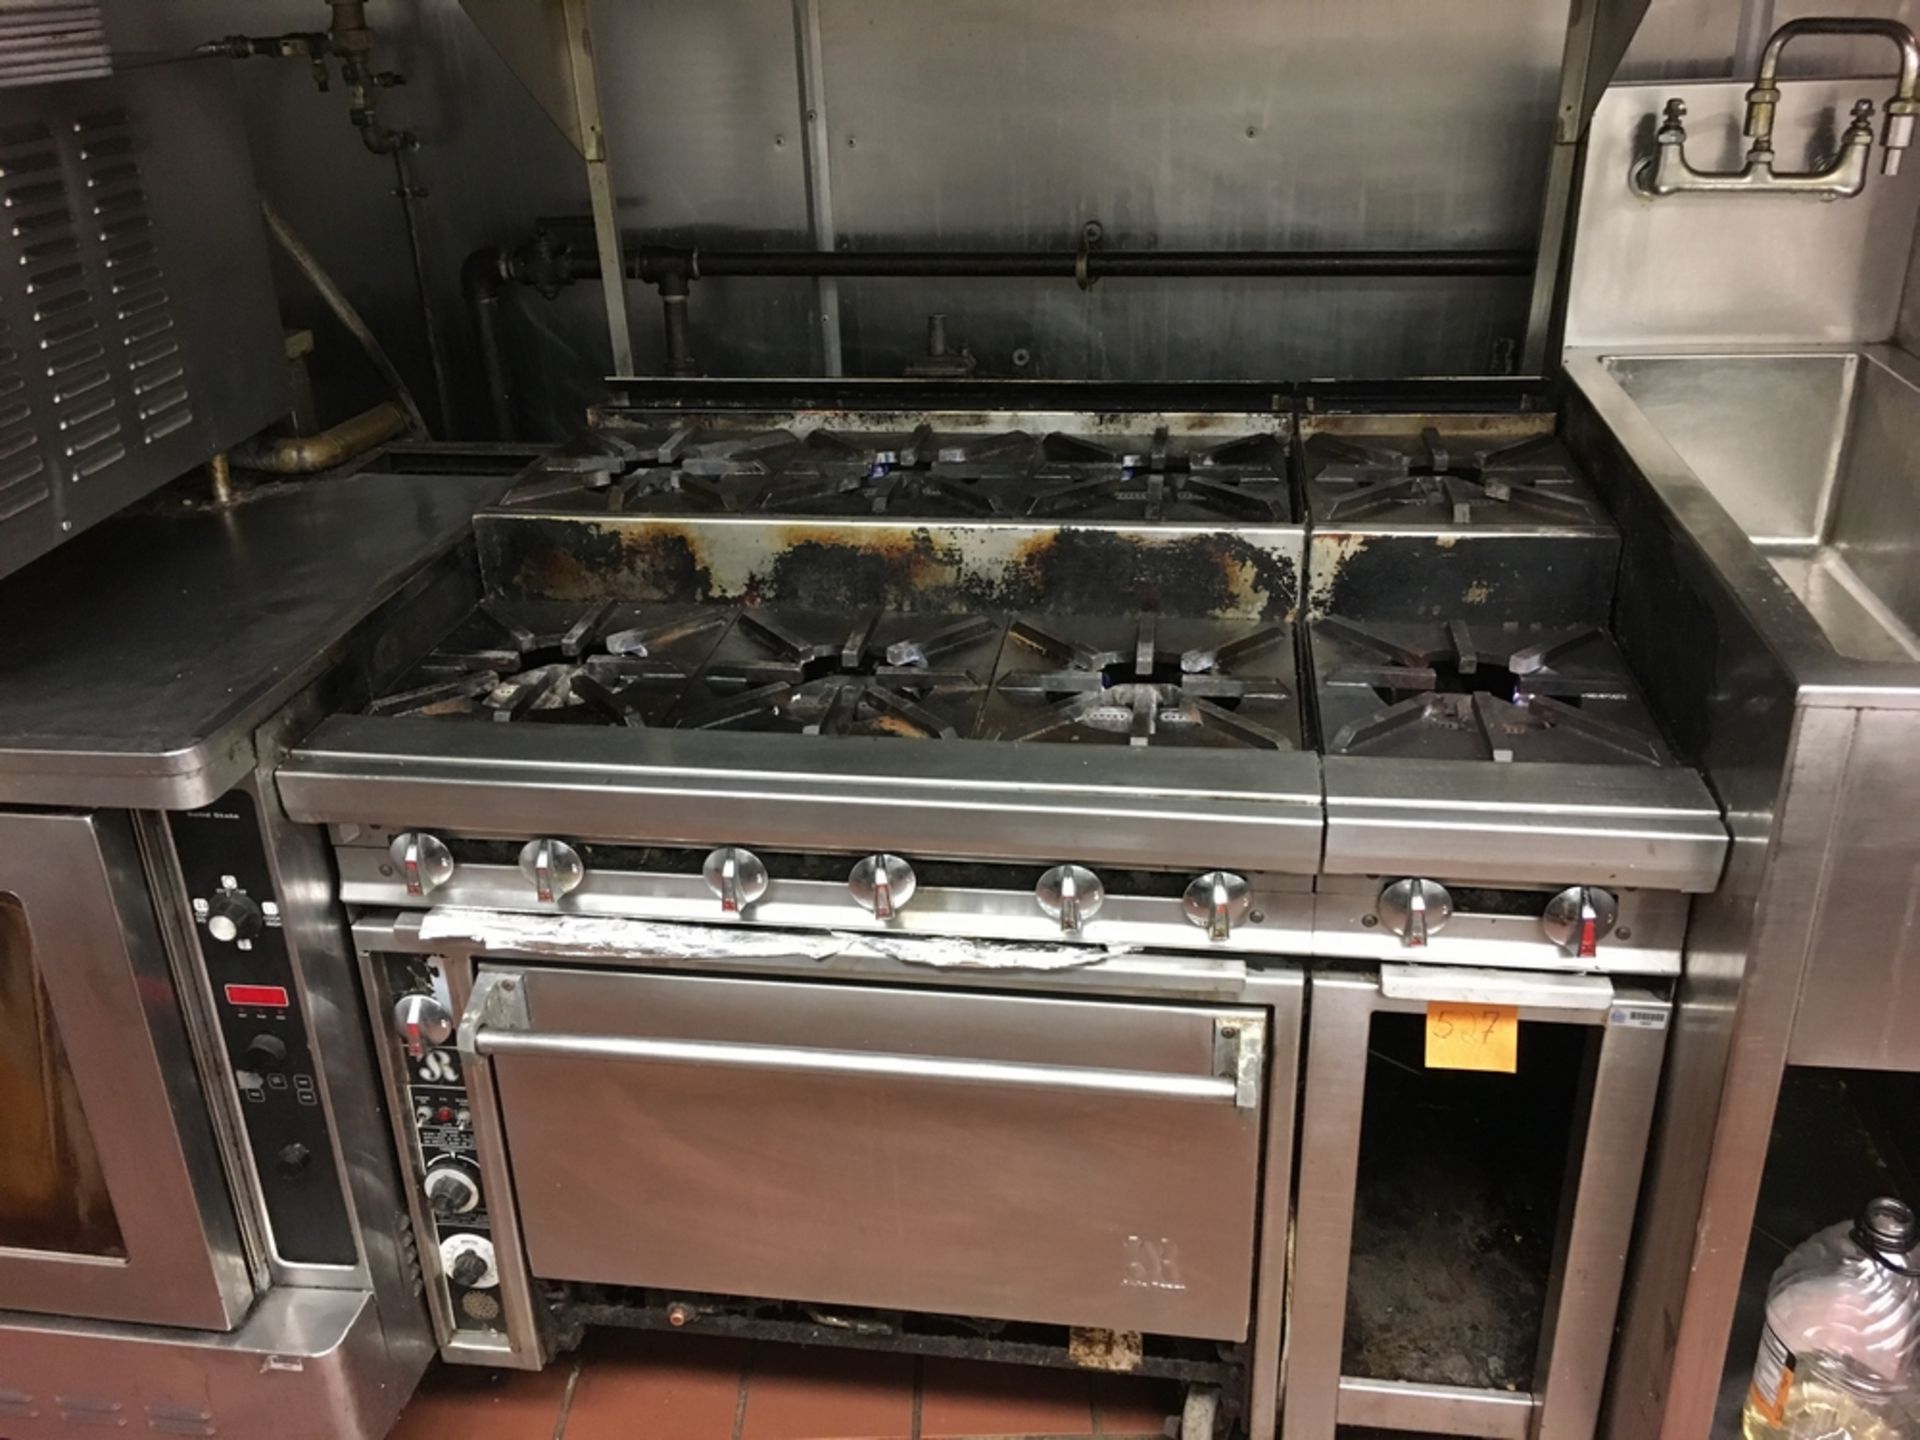 SS Gas Stove, 8-Burner, 4 ft x 3 ft x 5 1/2 f Located: Main Kitchen, adjacent to Palace Grill